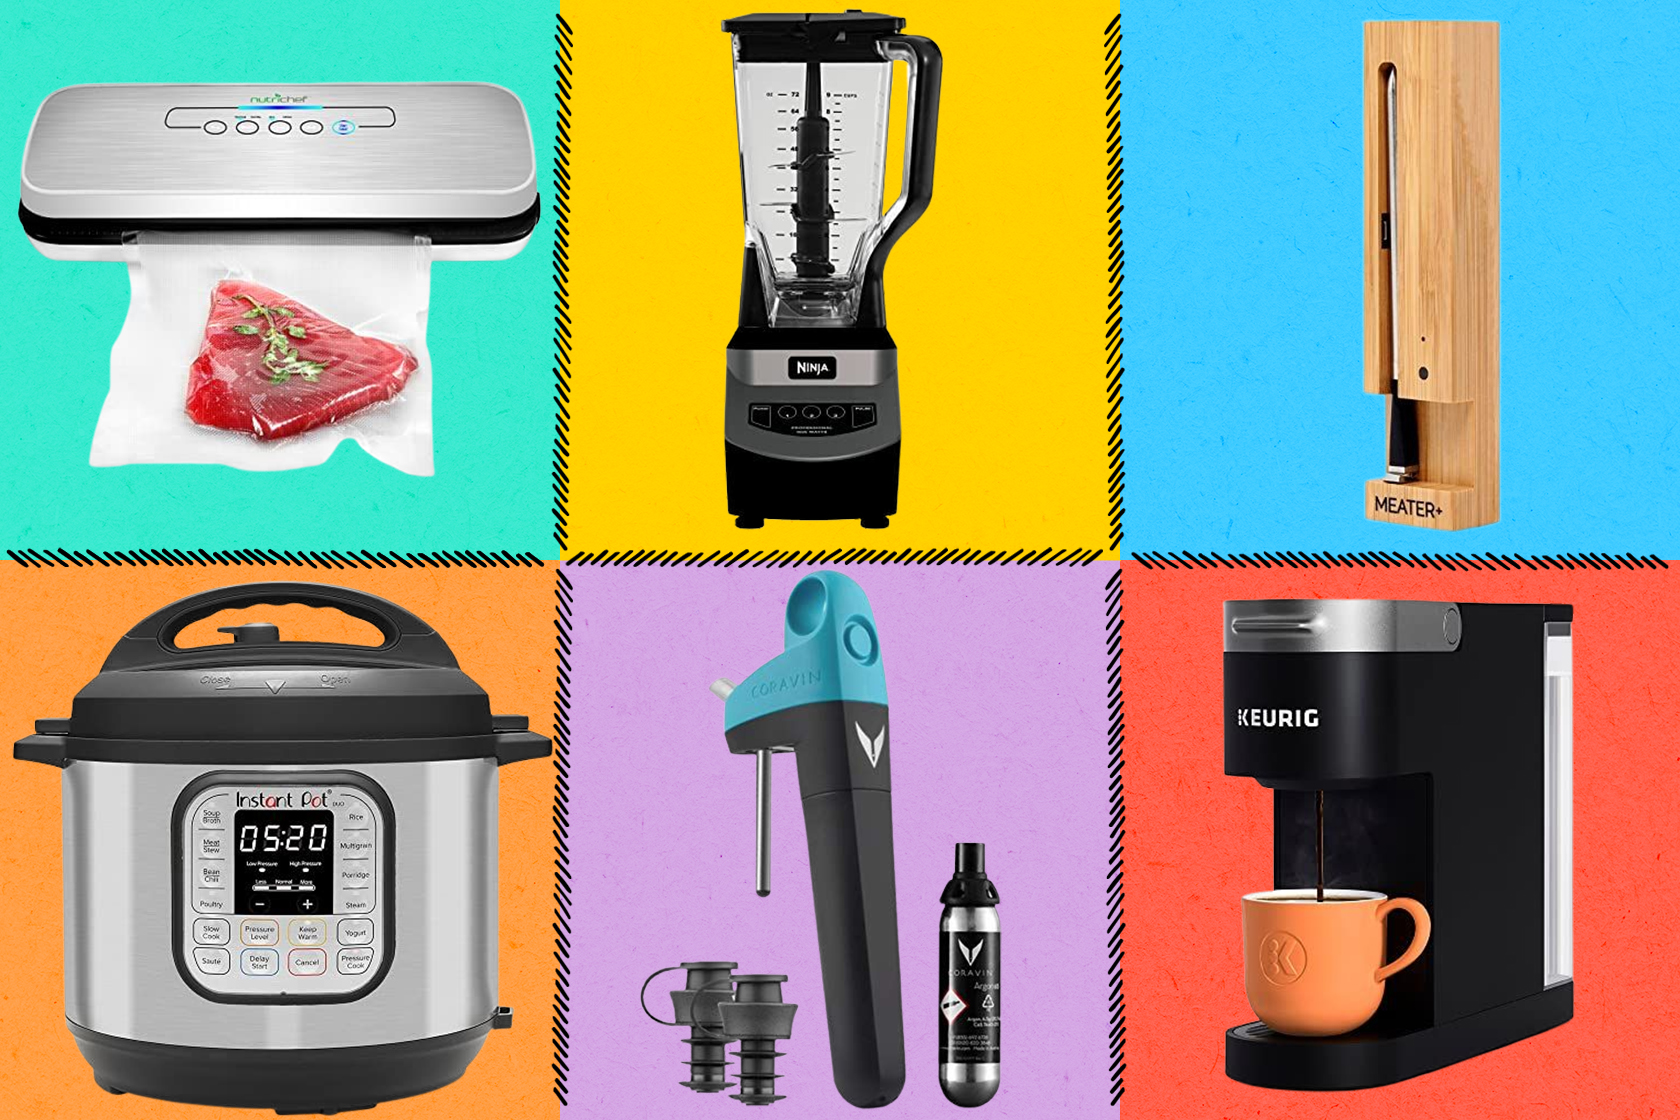 13 kitchen tools and appliances under $100